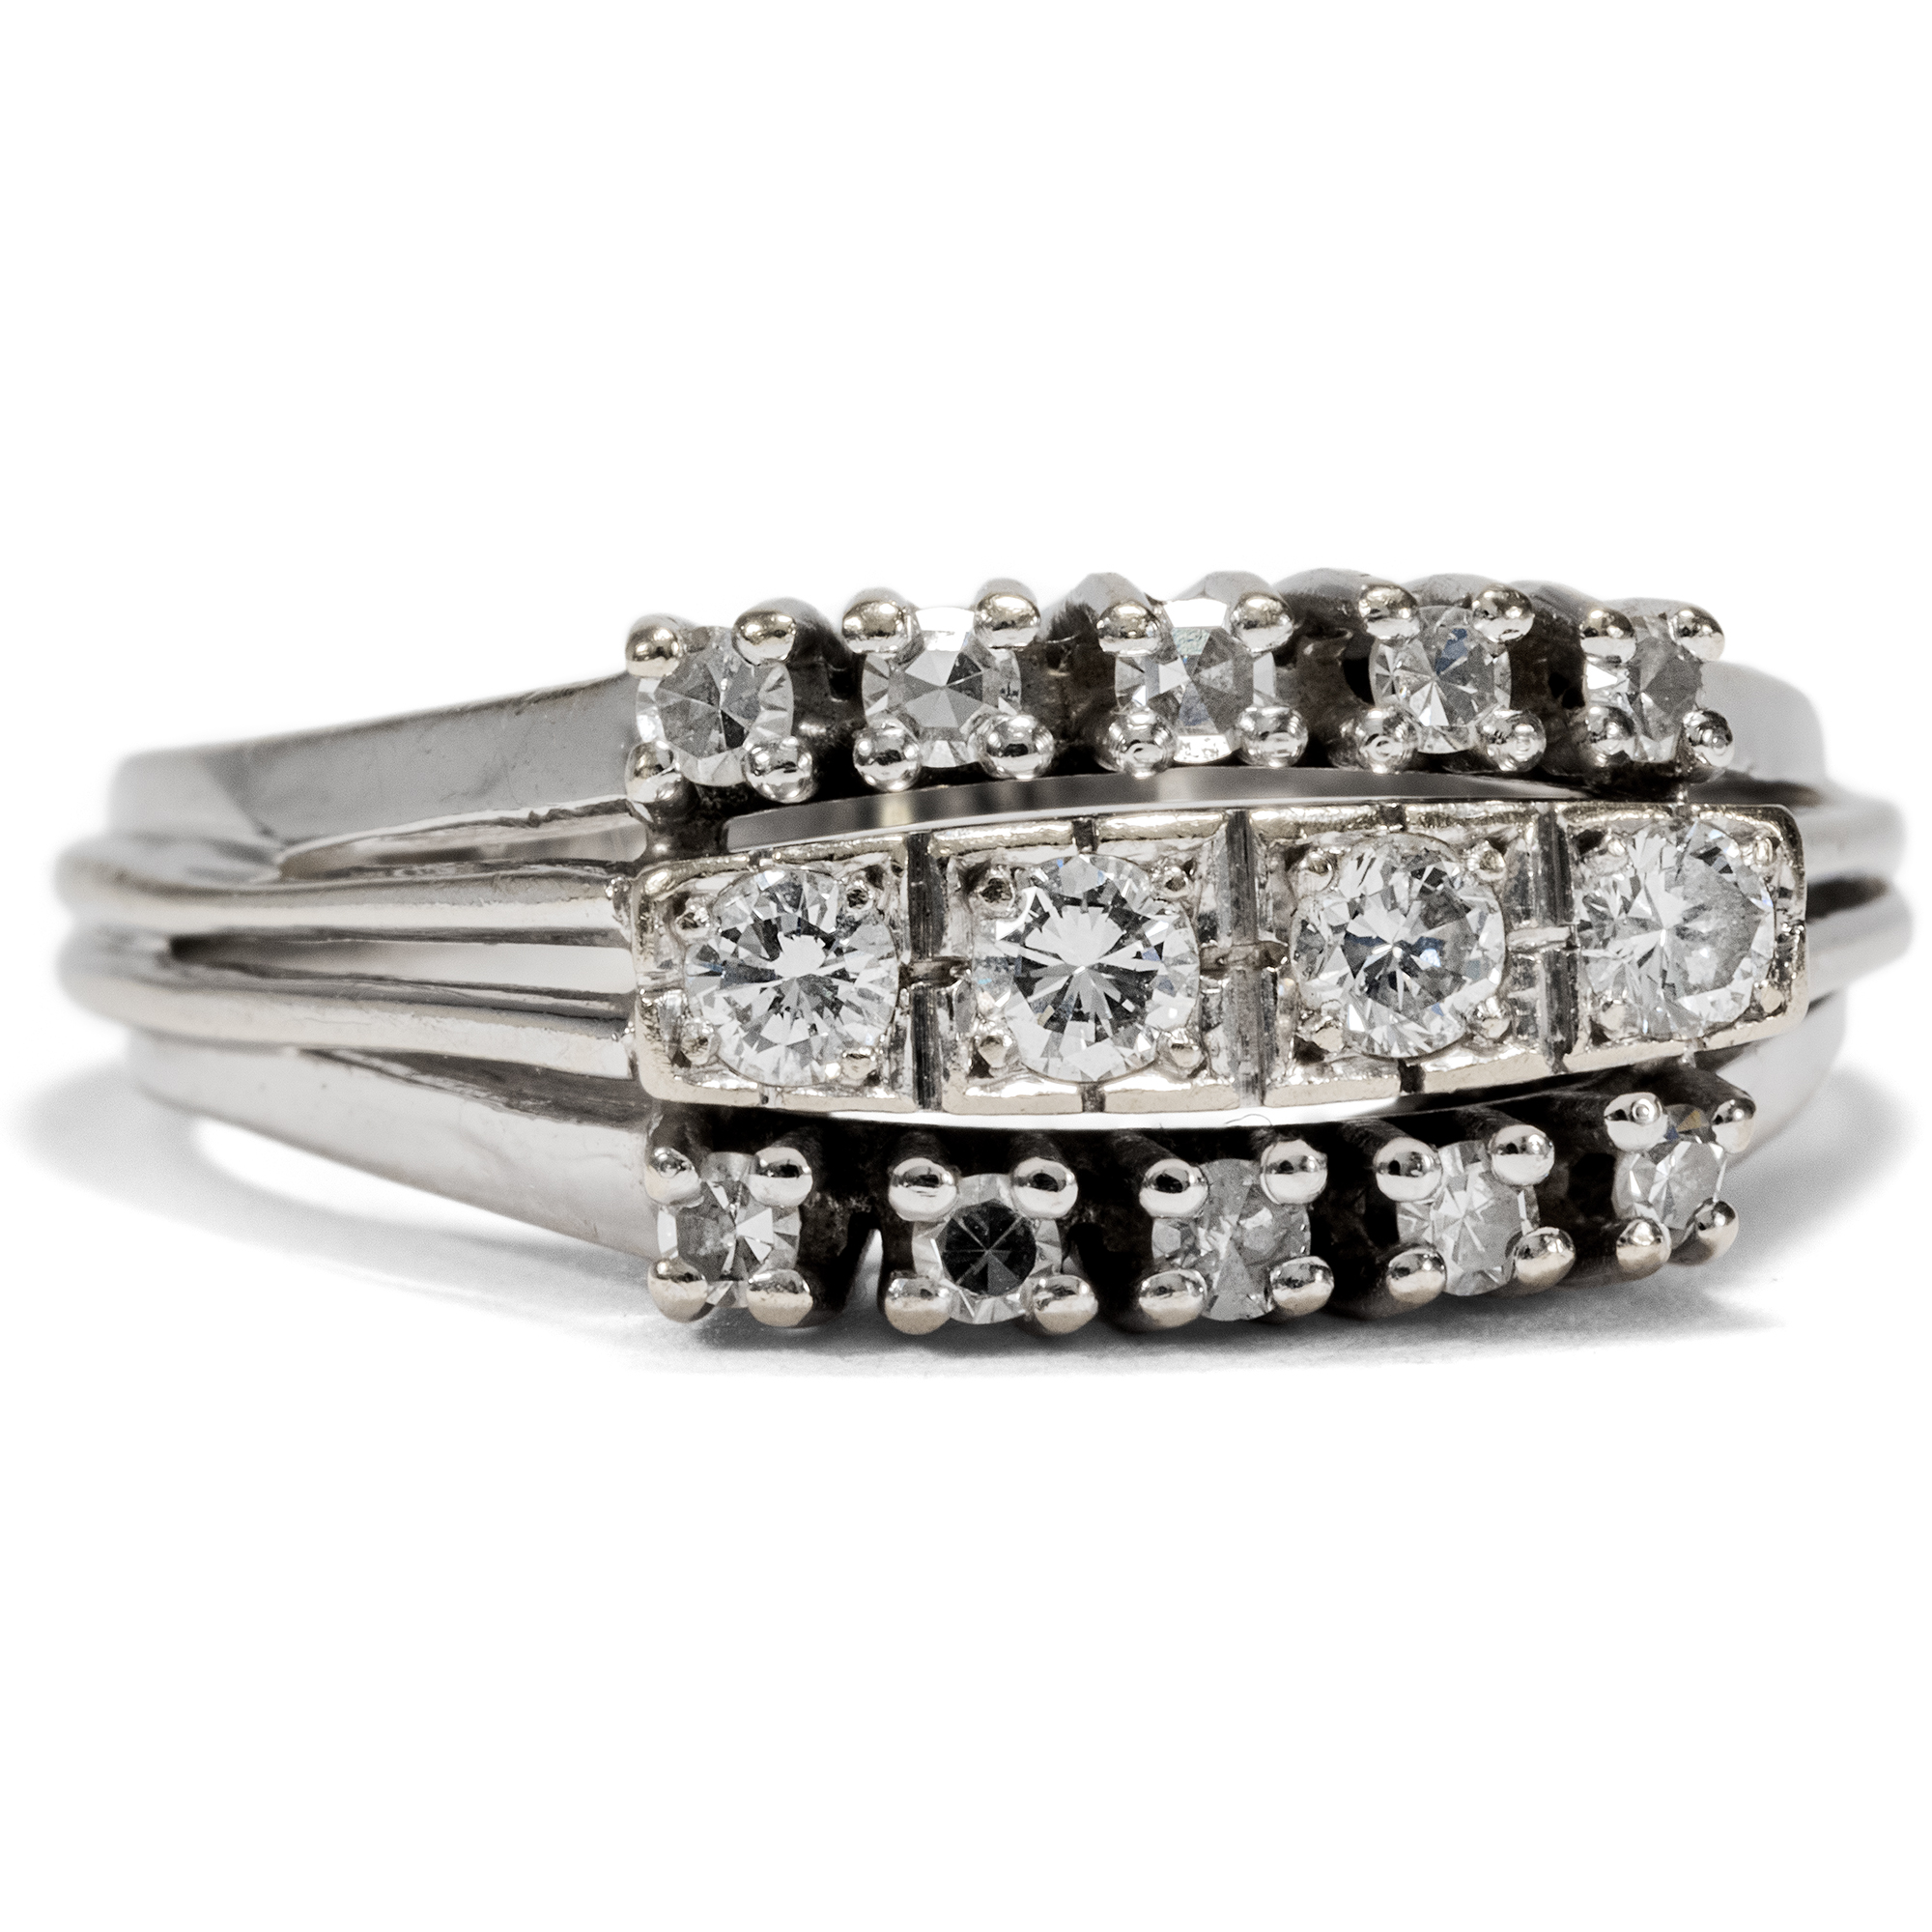 Stylish Vintage Ring with Diamonds in White Gold, circa 1970